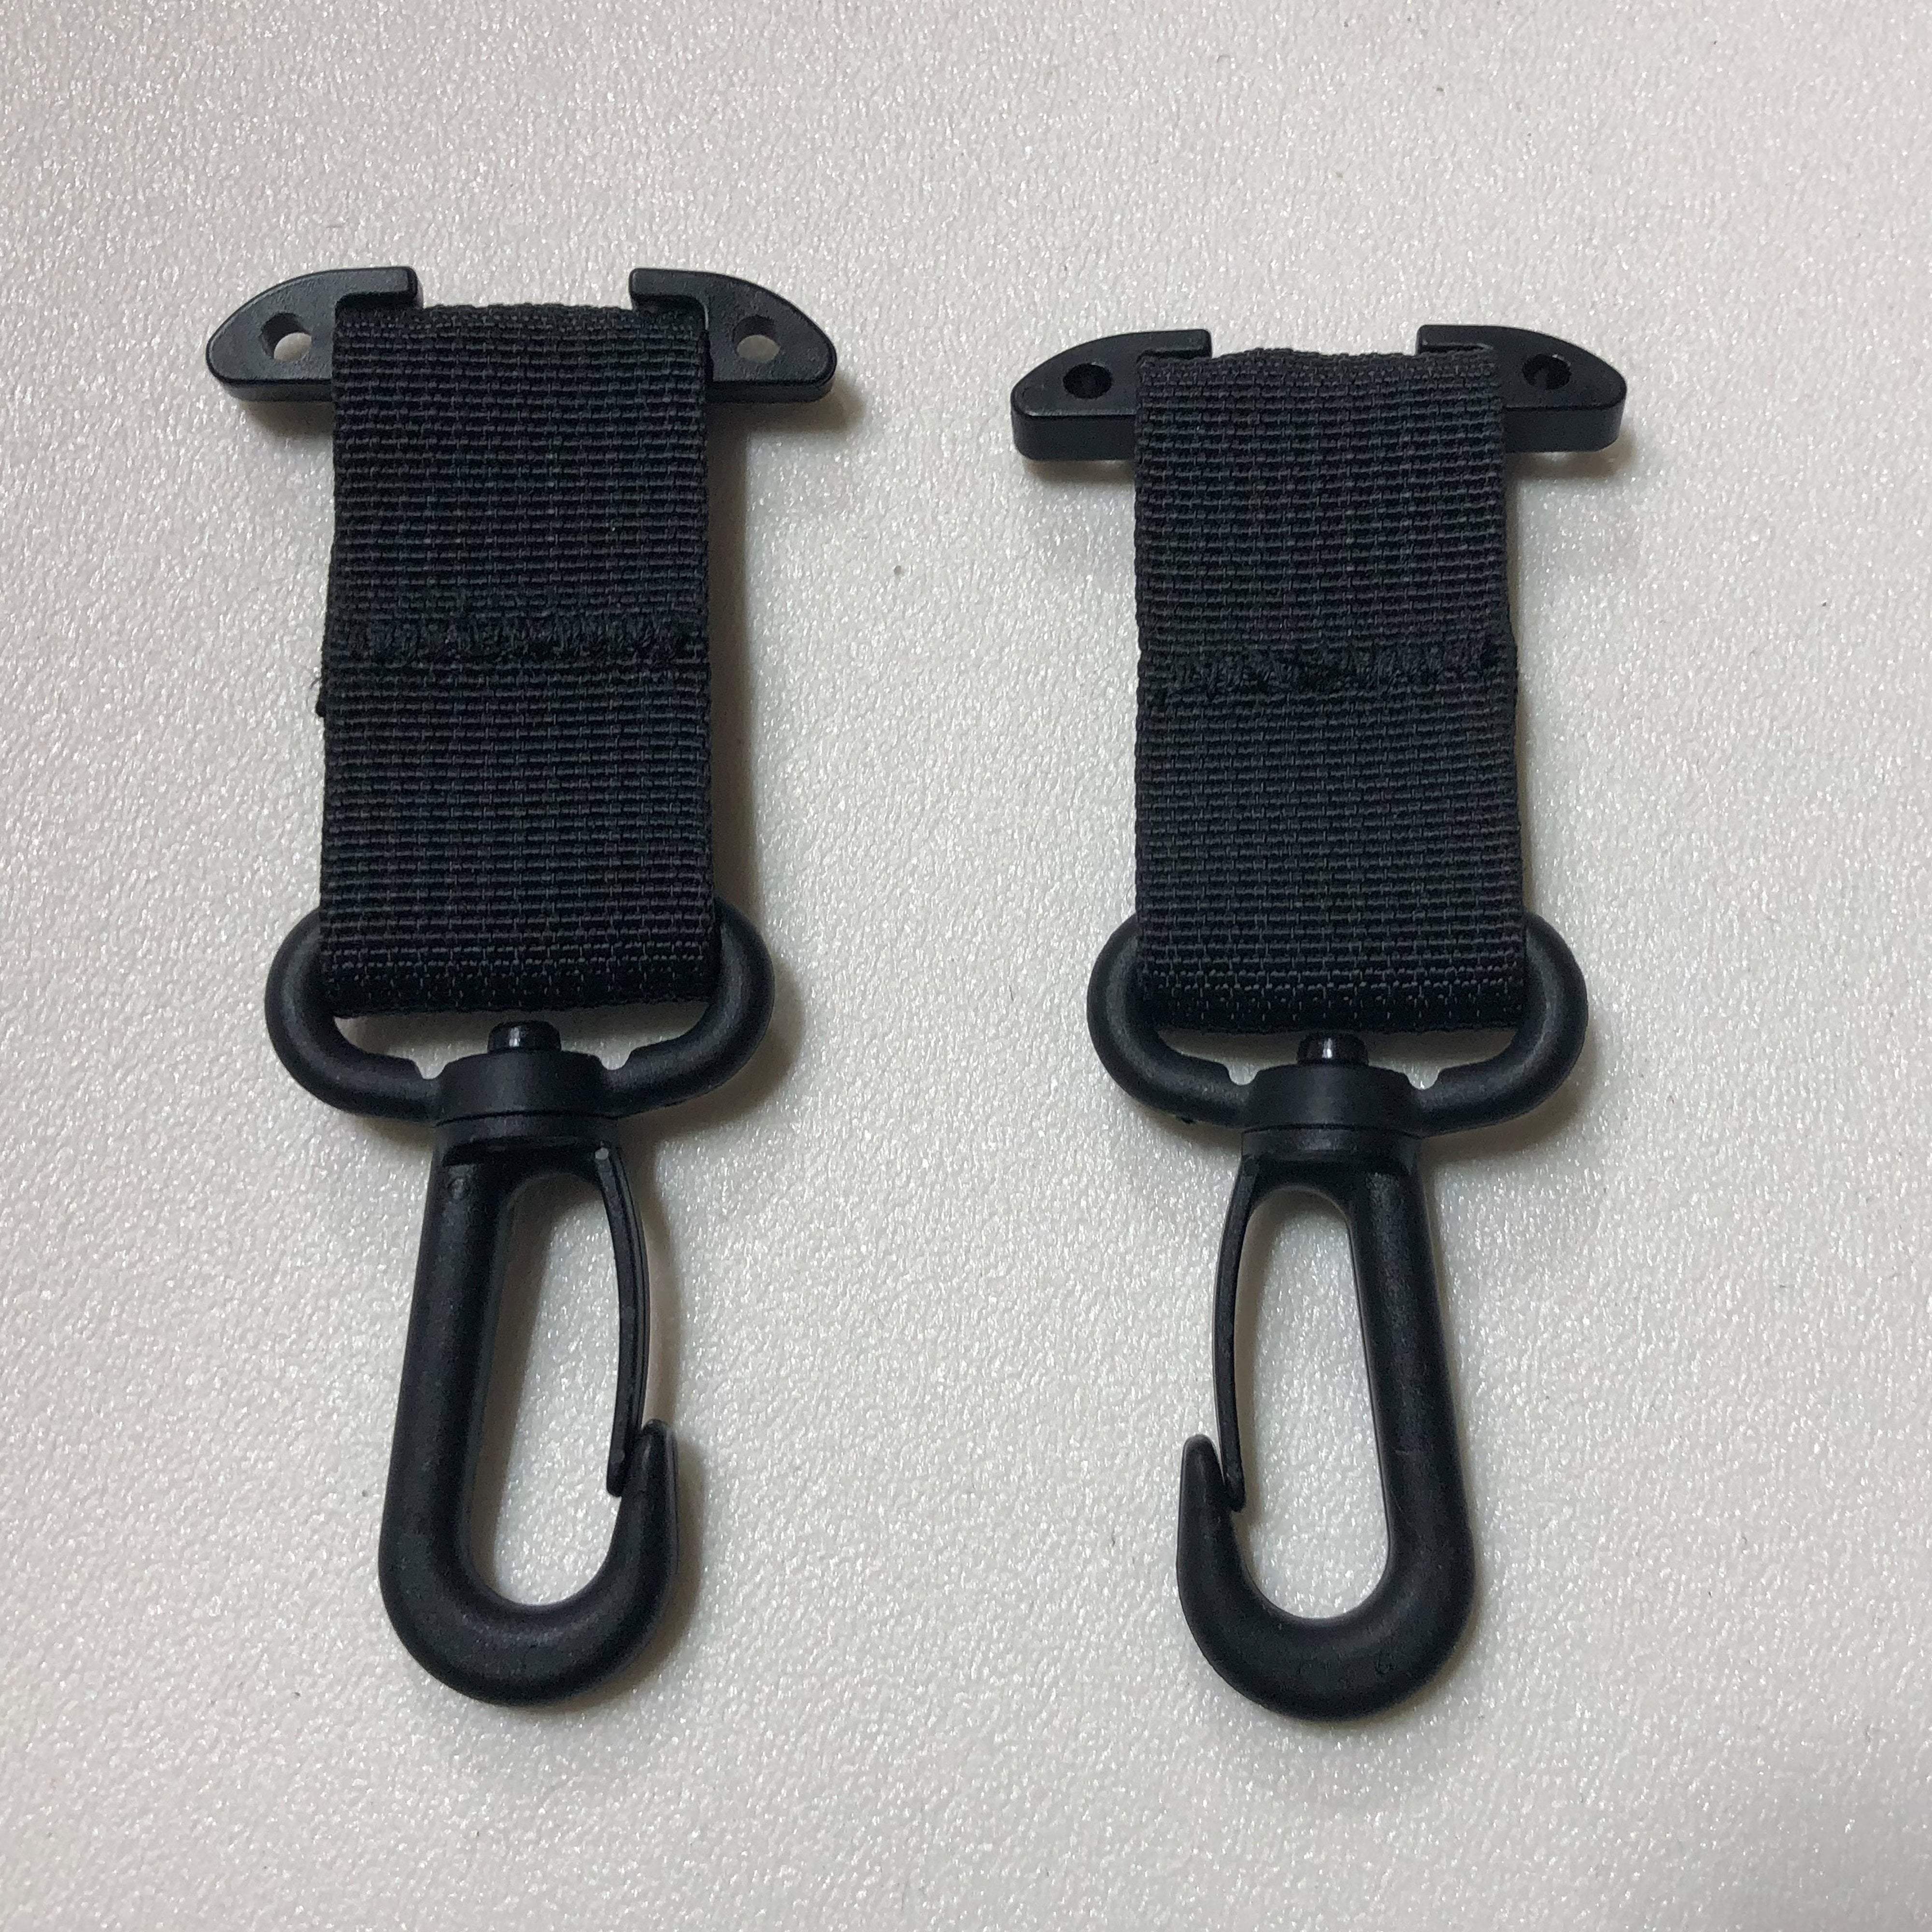 MOLLE Attachments by Bartact - PALS/MOLLE T-Bar & Swivel Hooks